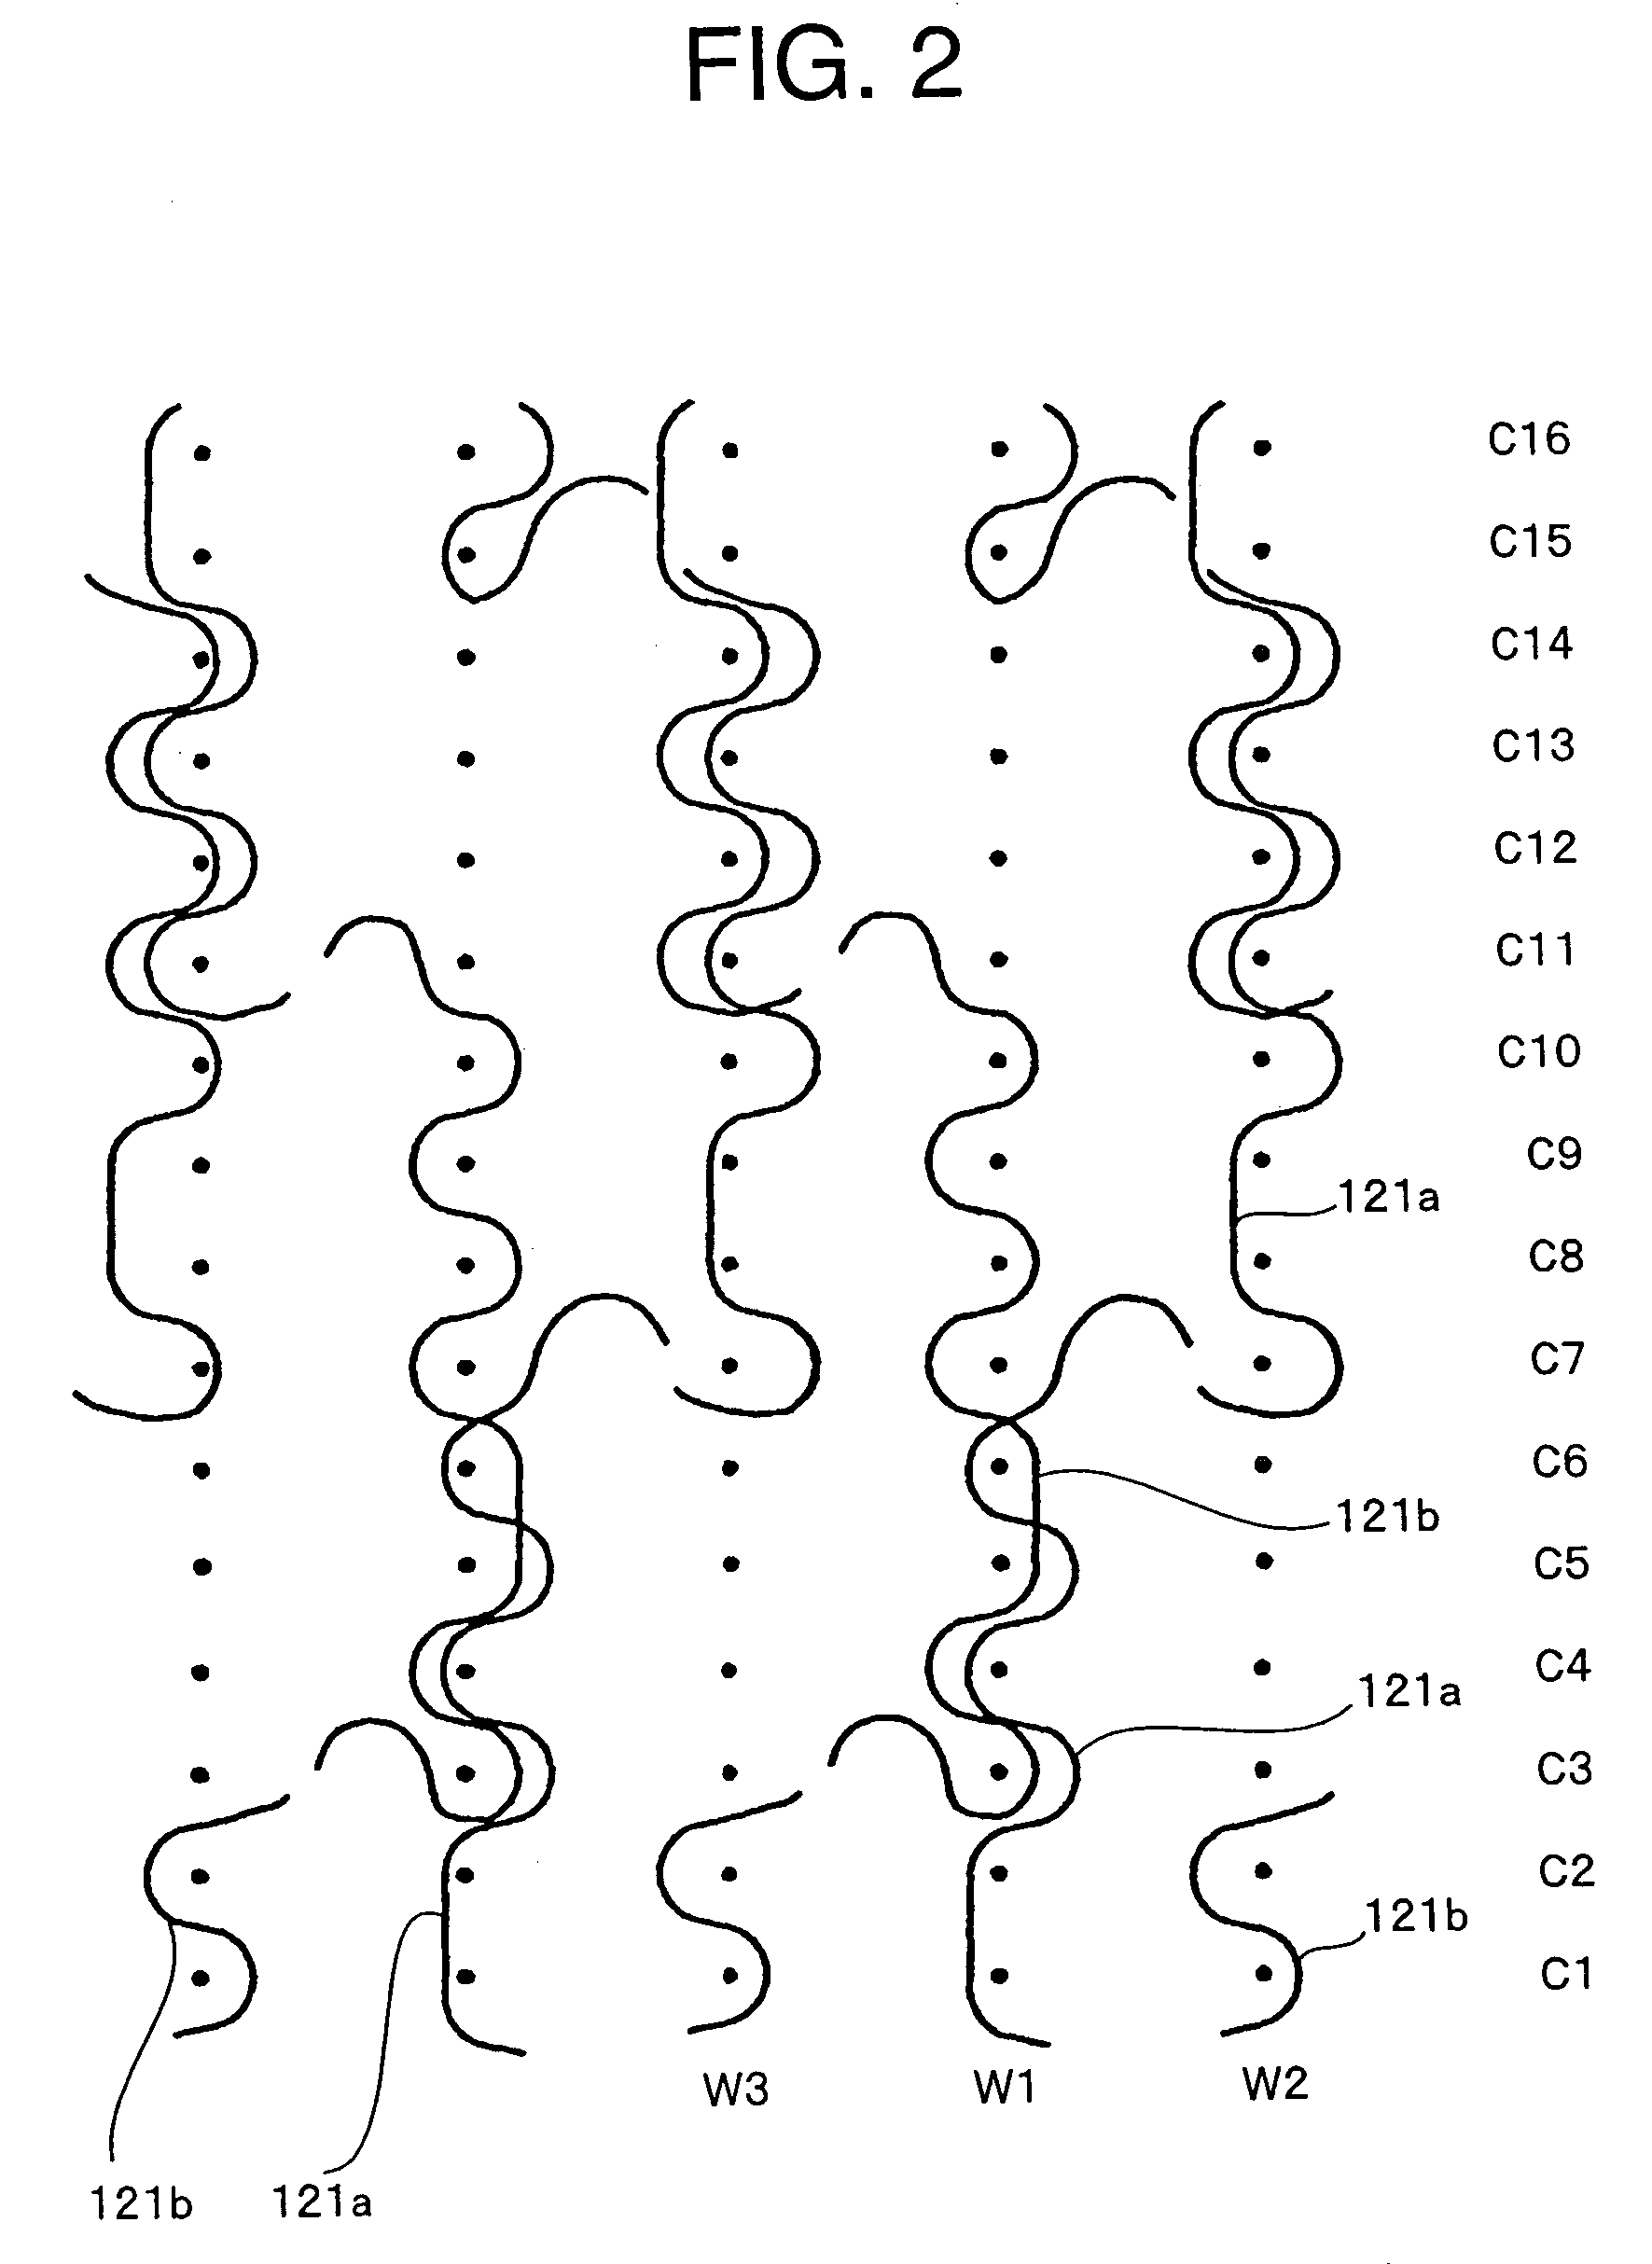 Knitted surface fastener